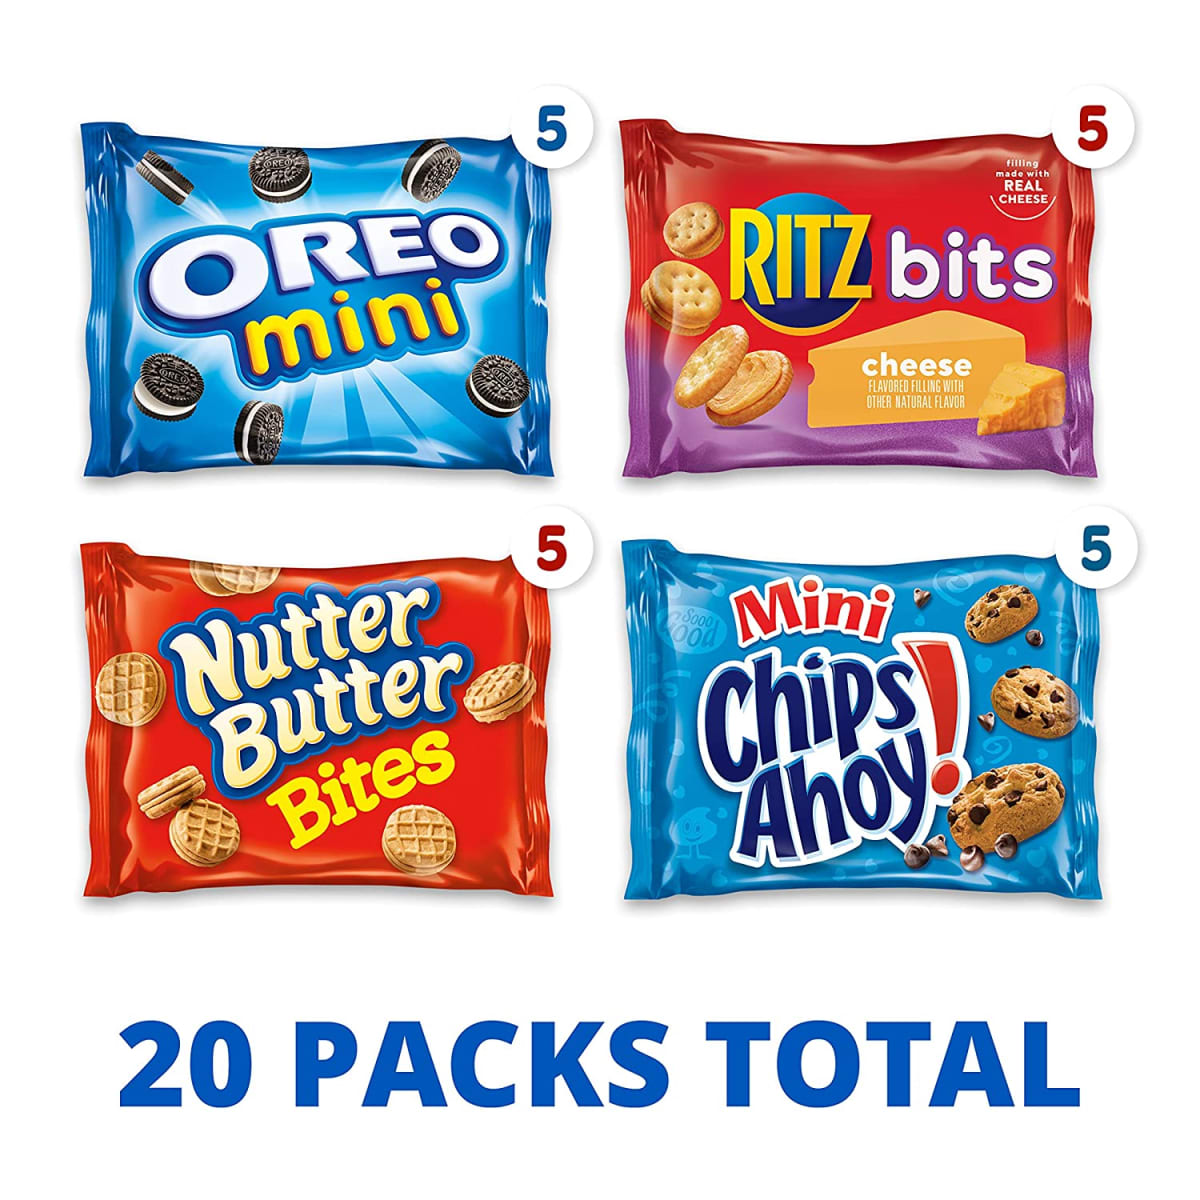 Nabisco Classic Mix Variety Pack, OREO Mini, CHIPS AHOY! Mini, Nutter Butter Bites, RITZ Bits Cheese